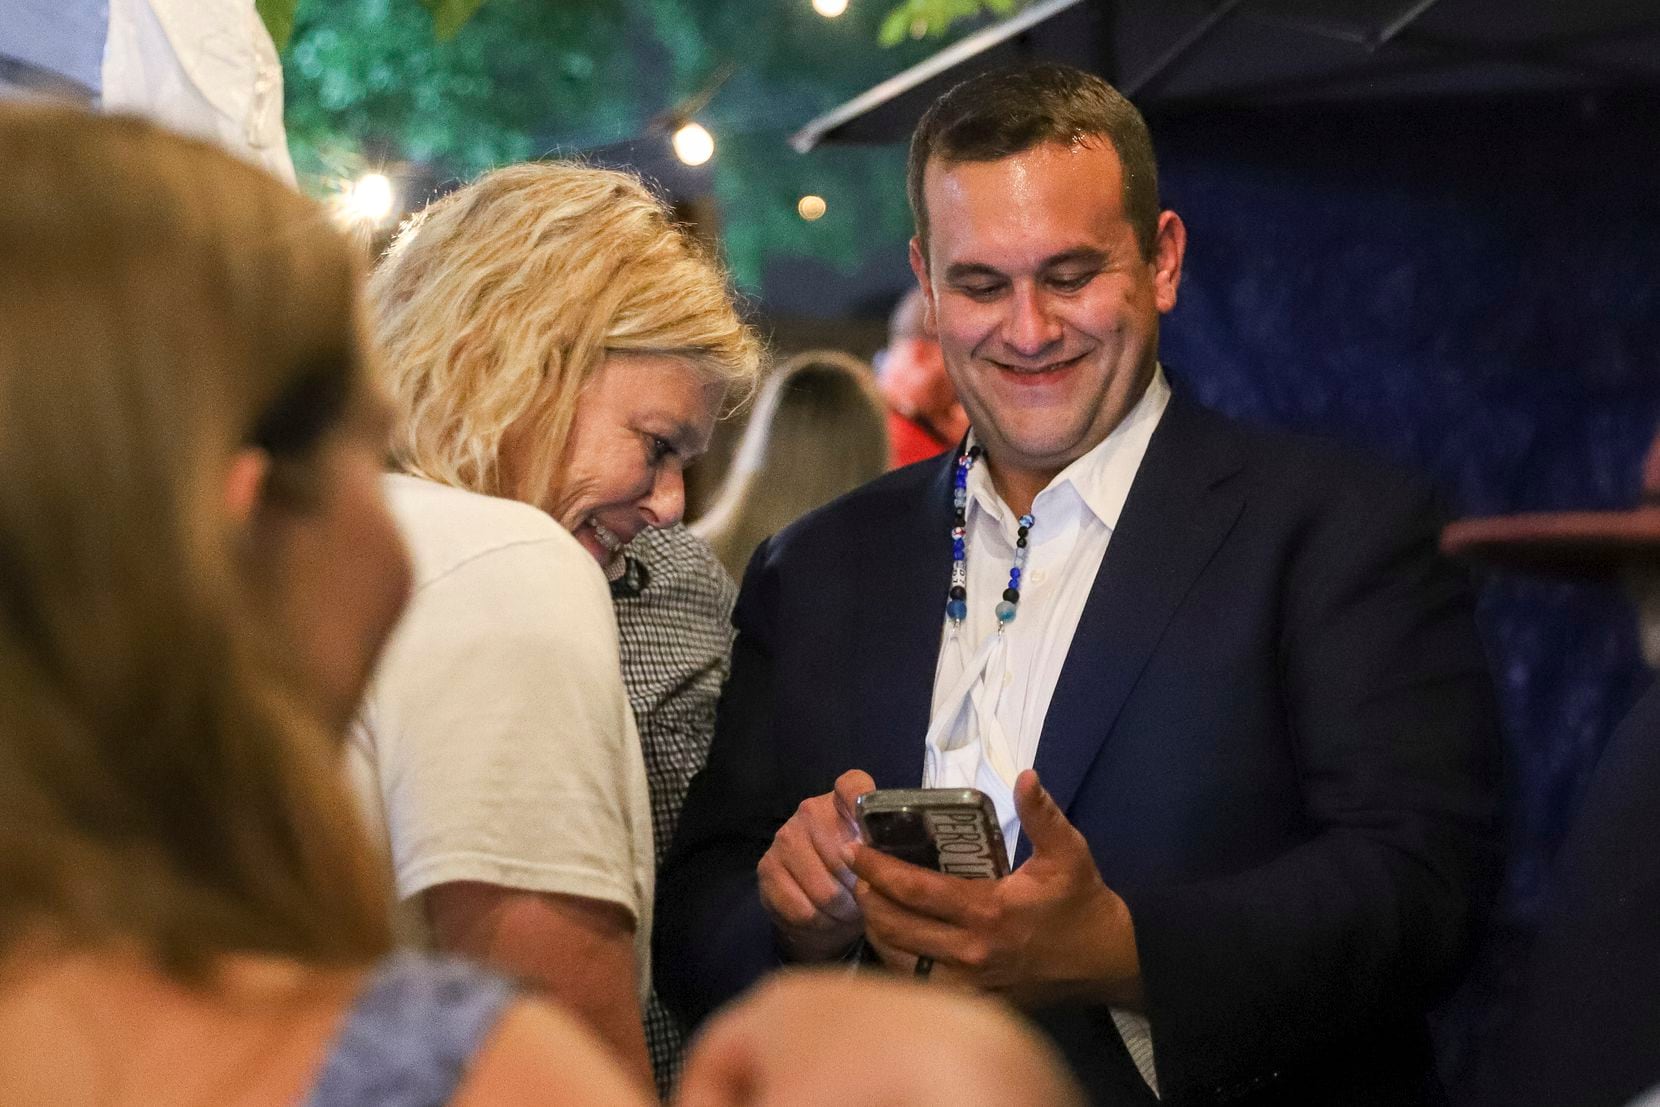 Adam Bazaldua, Dallas City Council District 7 candidate, smiles with his mother Pam Bradford (left) as they looks at results during an election night watch party at Eight Bells Alehouse Dallas, Saturday, May 1, 2021. (Elias Valverde II / Special Contributor)